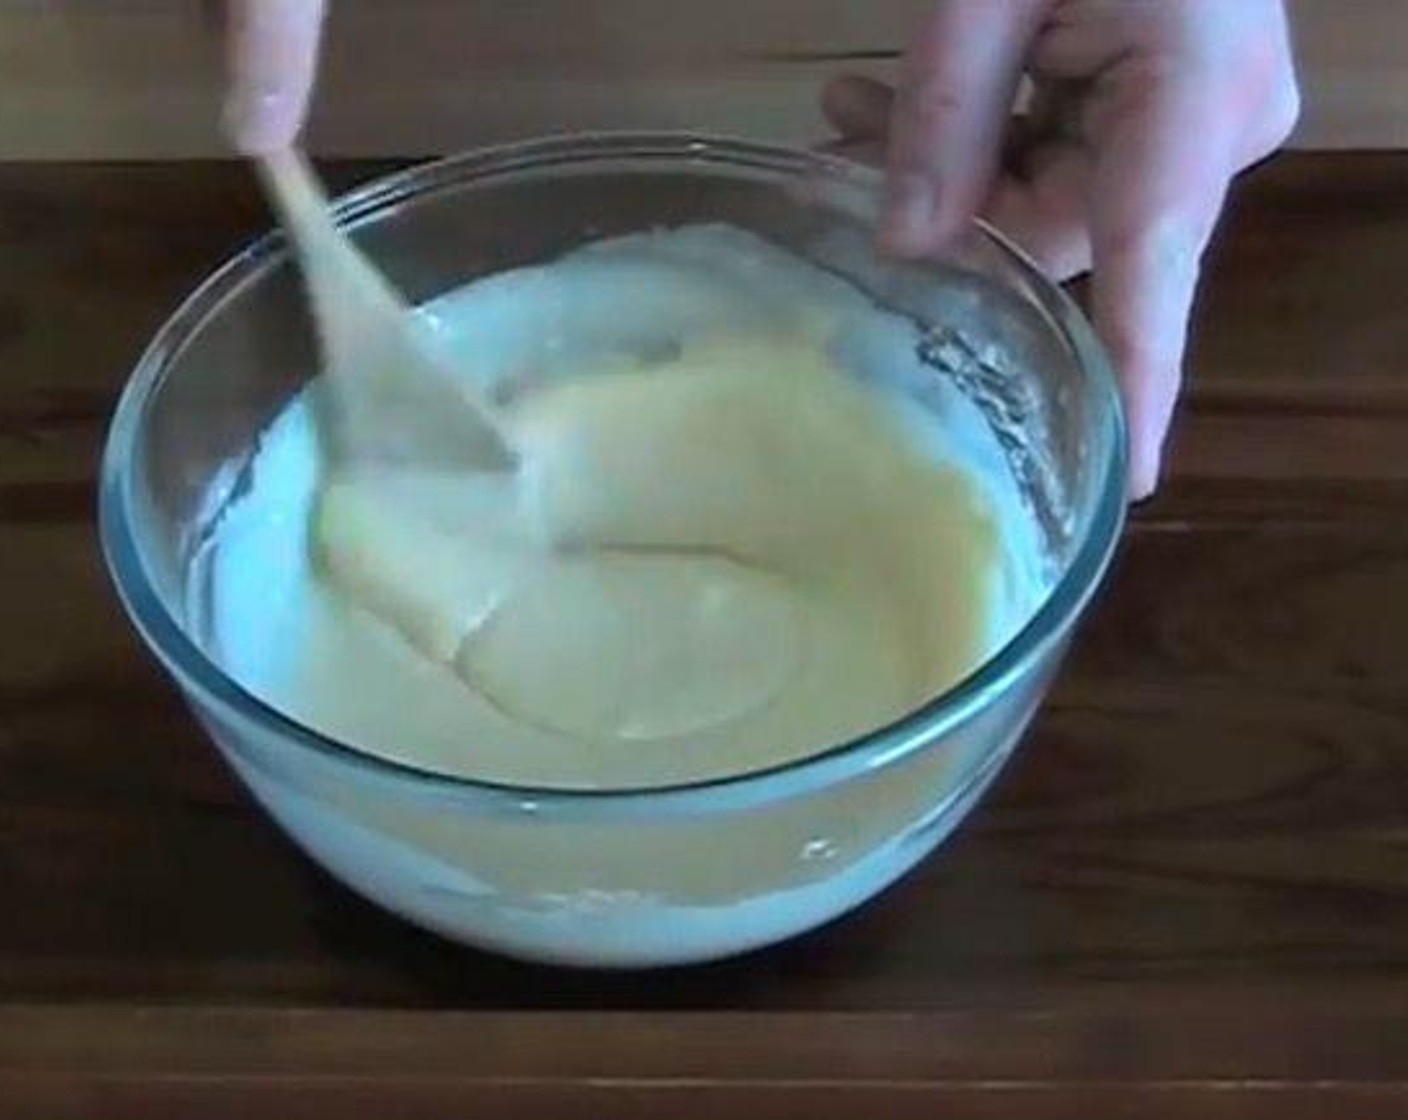 step 1 In a mixing bowl, add Self-Rising Flour (1 cup), Caster Sugar (1/2 cup), Egg (1), and Milk (1/2 cup). Mix together until it forms a batter.